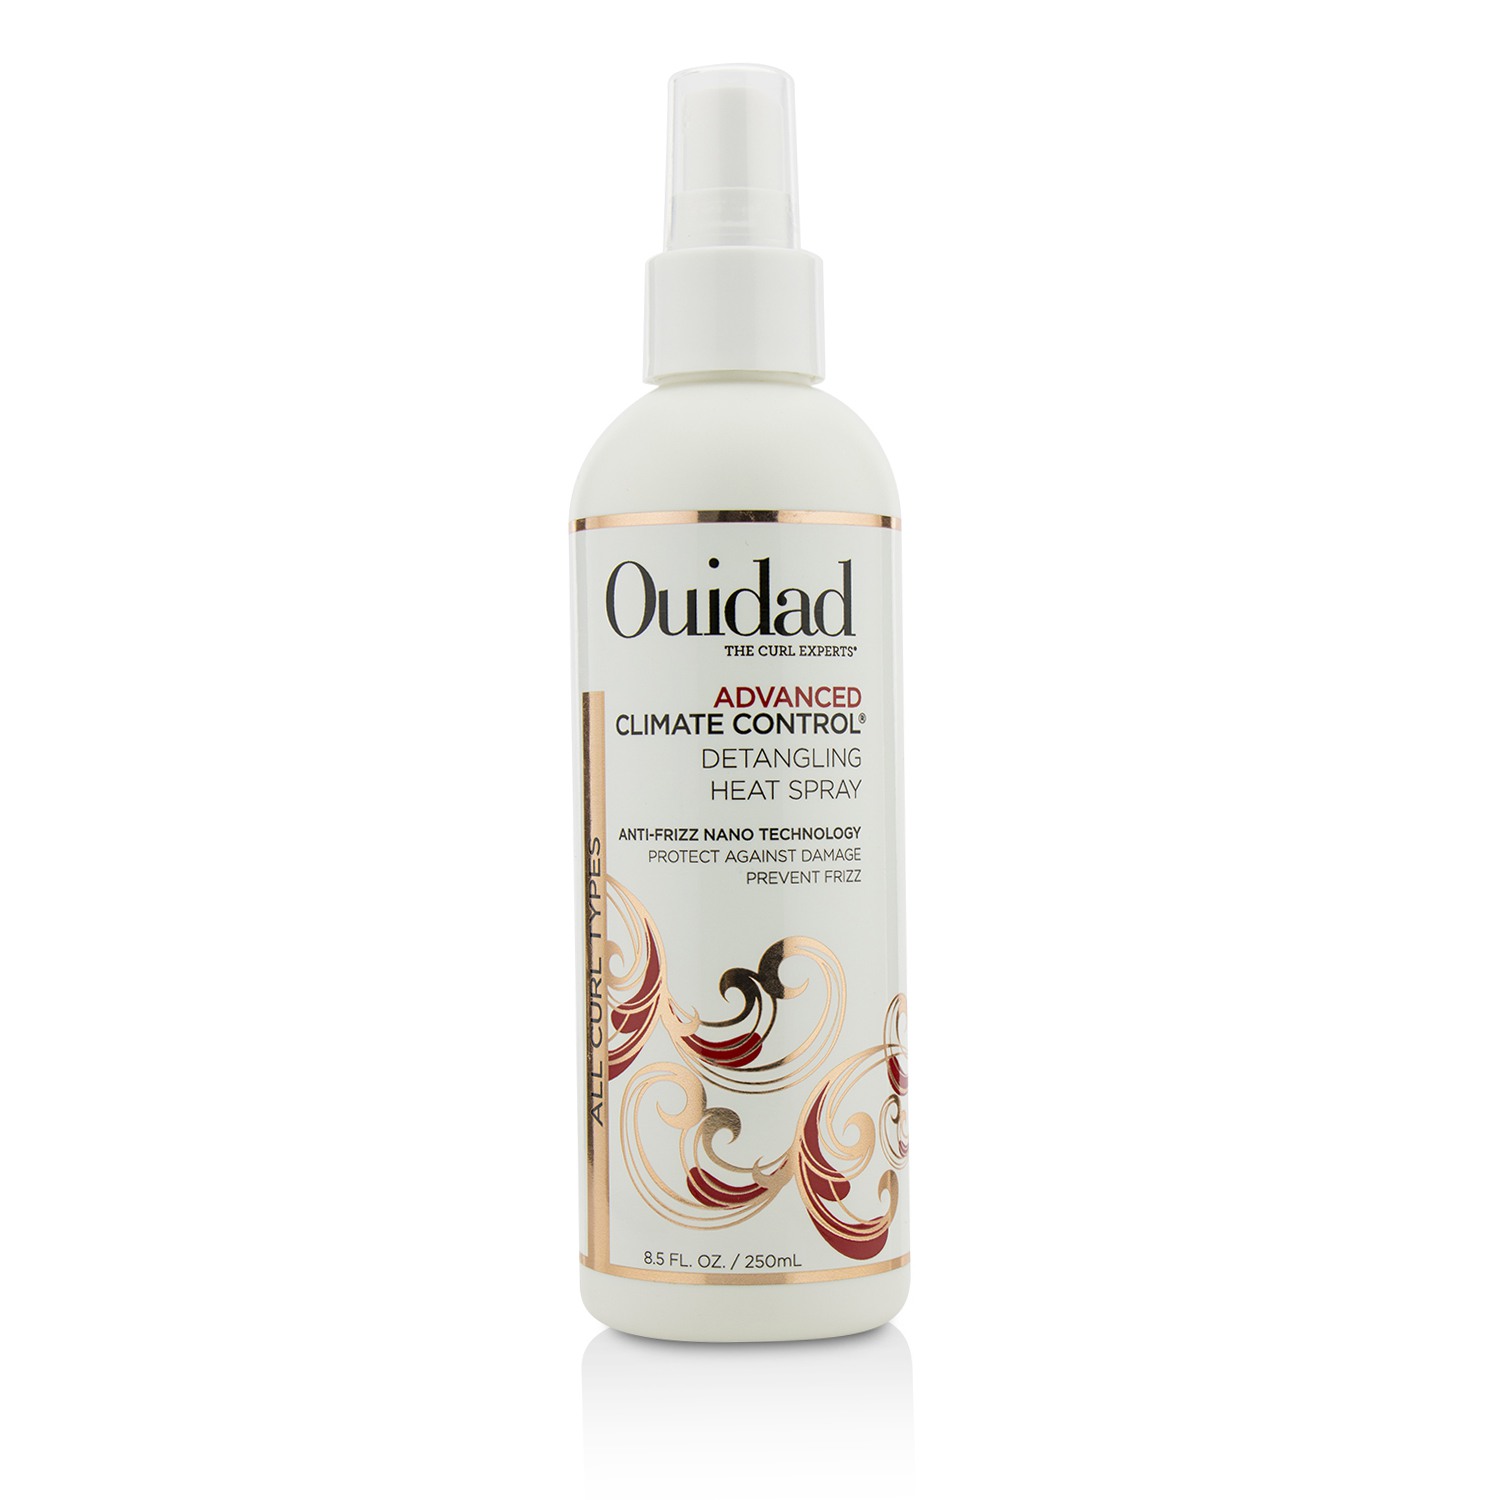 Advanced Climate Control Detangling Heat Spray (All Curl Types) Ouidad Image